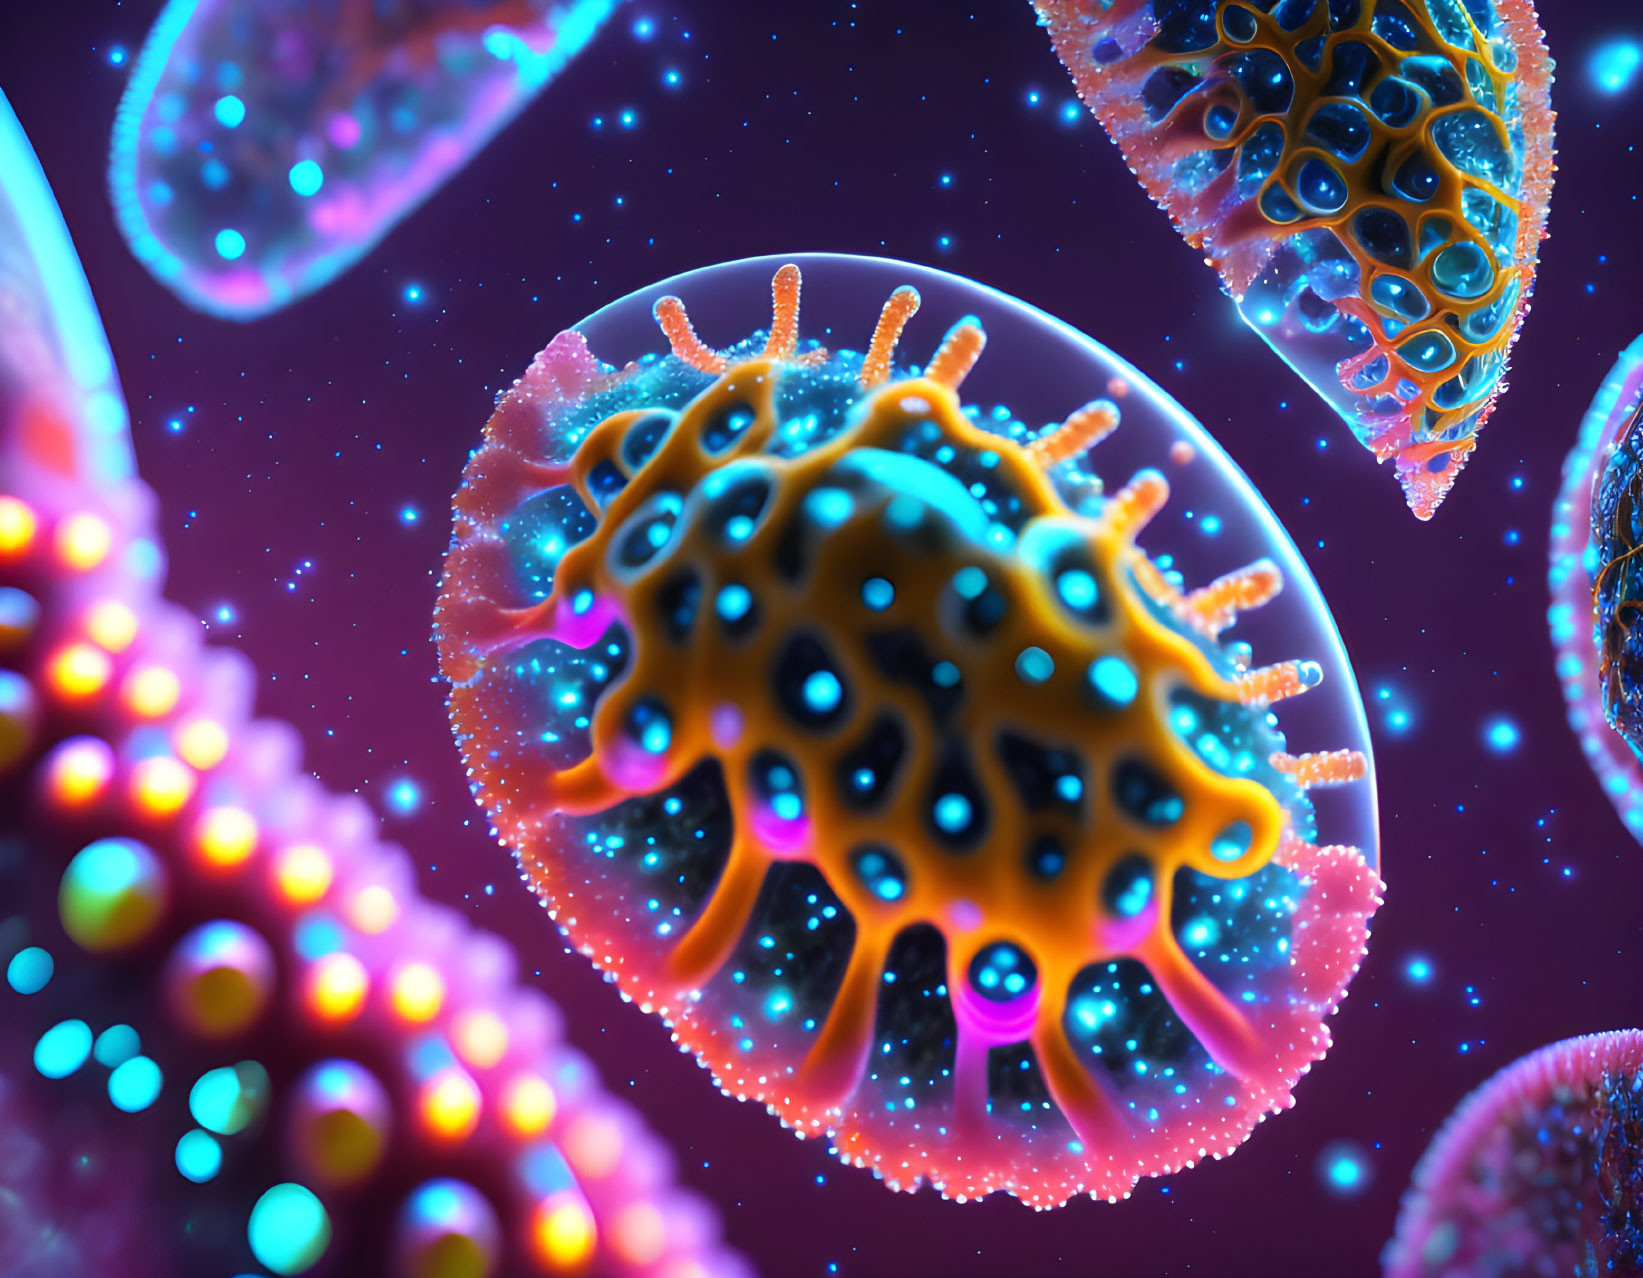 Colorful 3D Illustration of Spherical Viruses with Spike Proteins on Purple Background